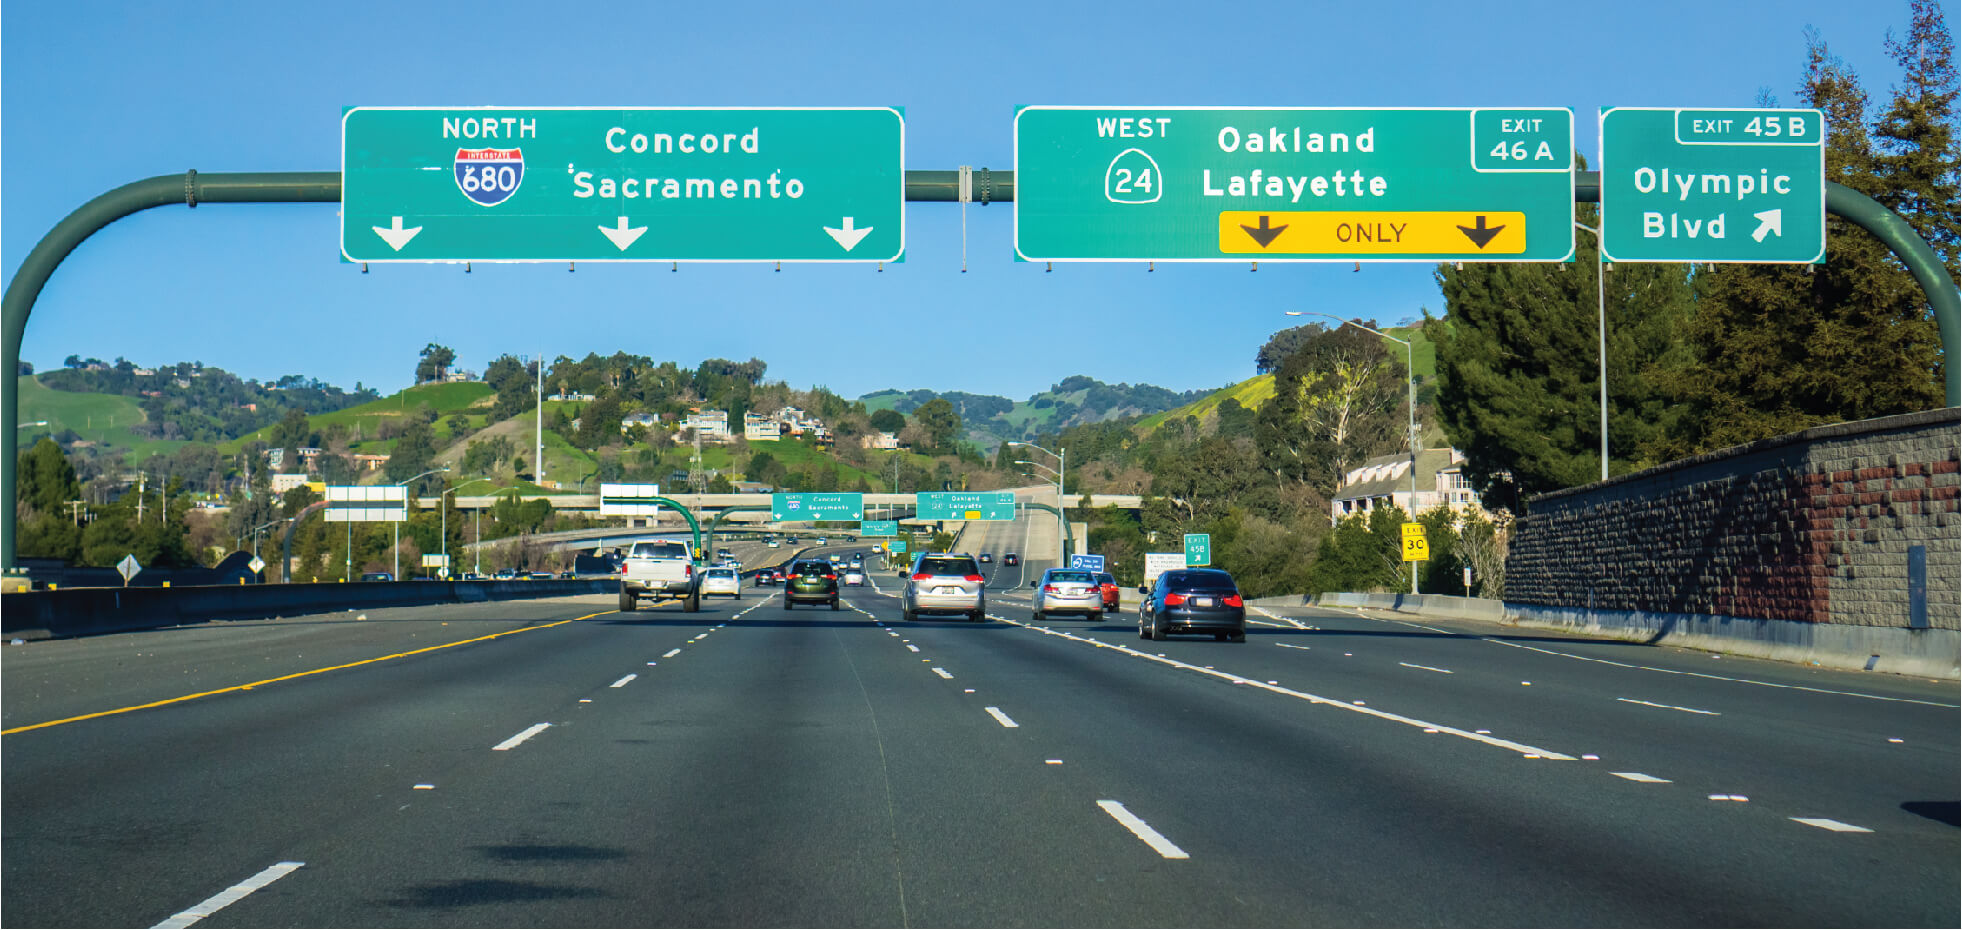 View of overhead signs